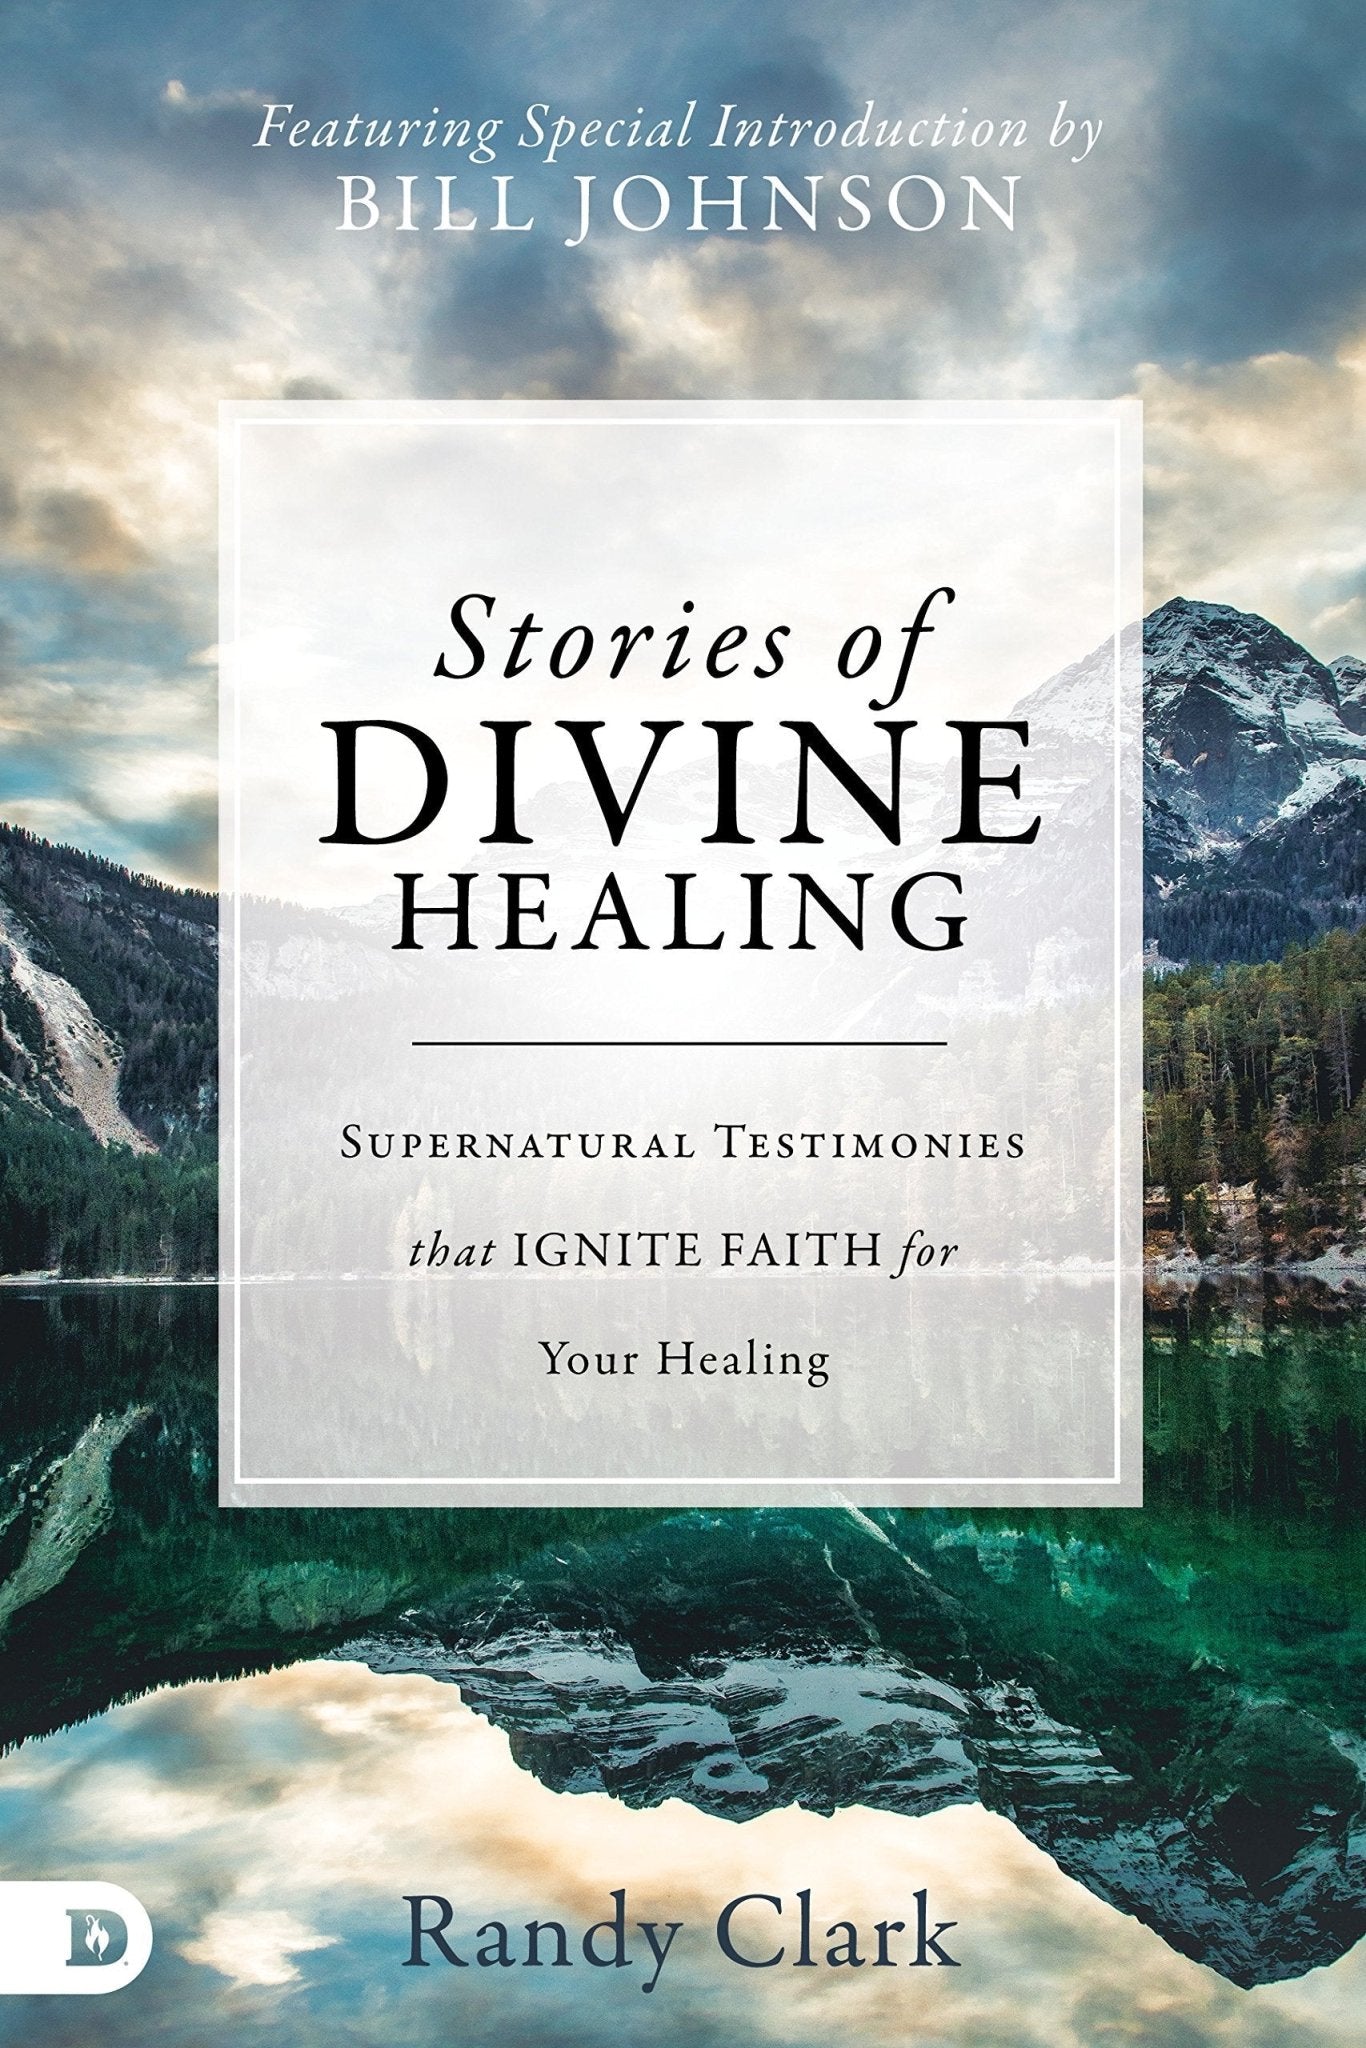 Stories of Divine Healing: Supernatural Testimonies that Ignite Faith for Your Healing